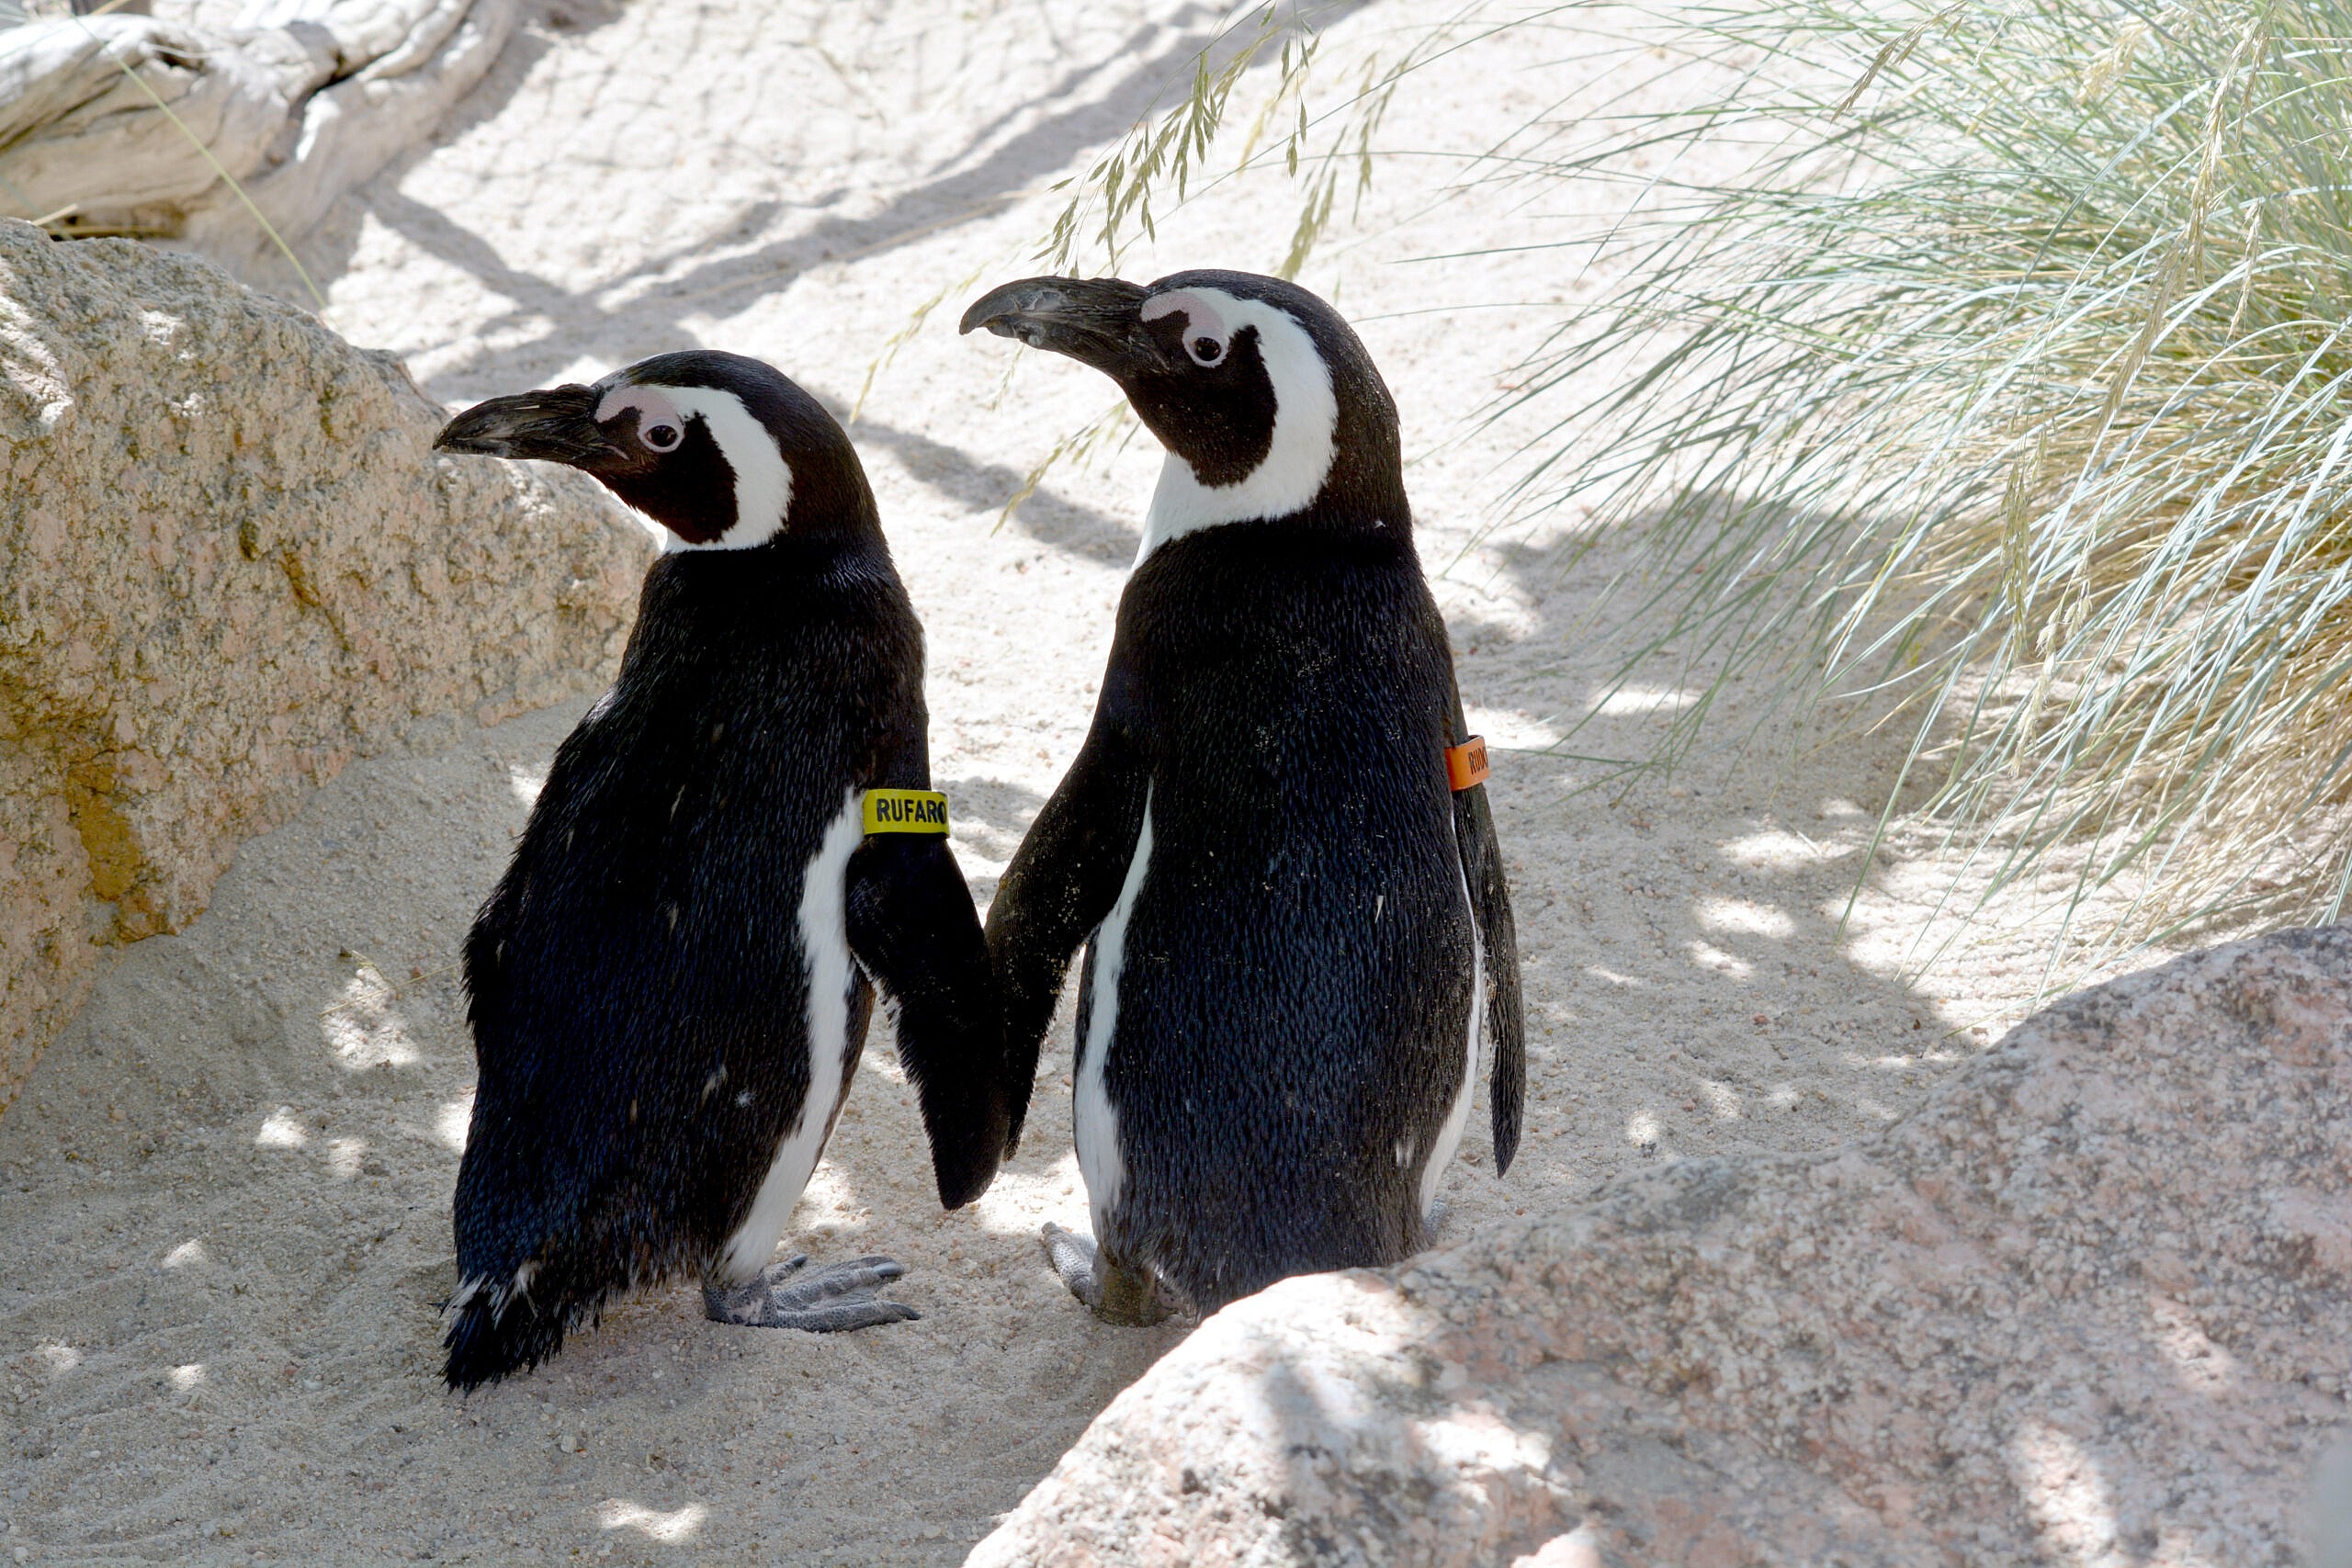 2 African penguins walking together away from the camera